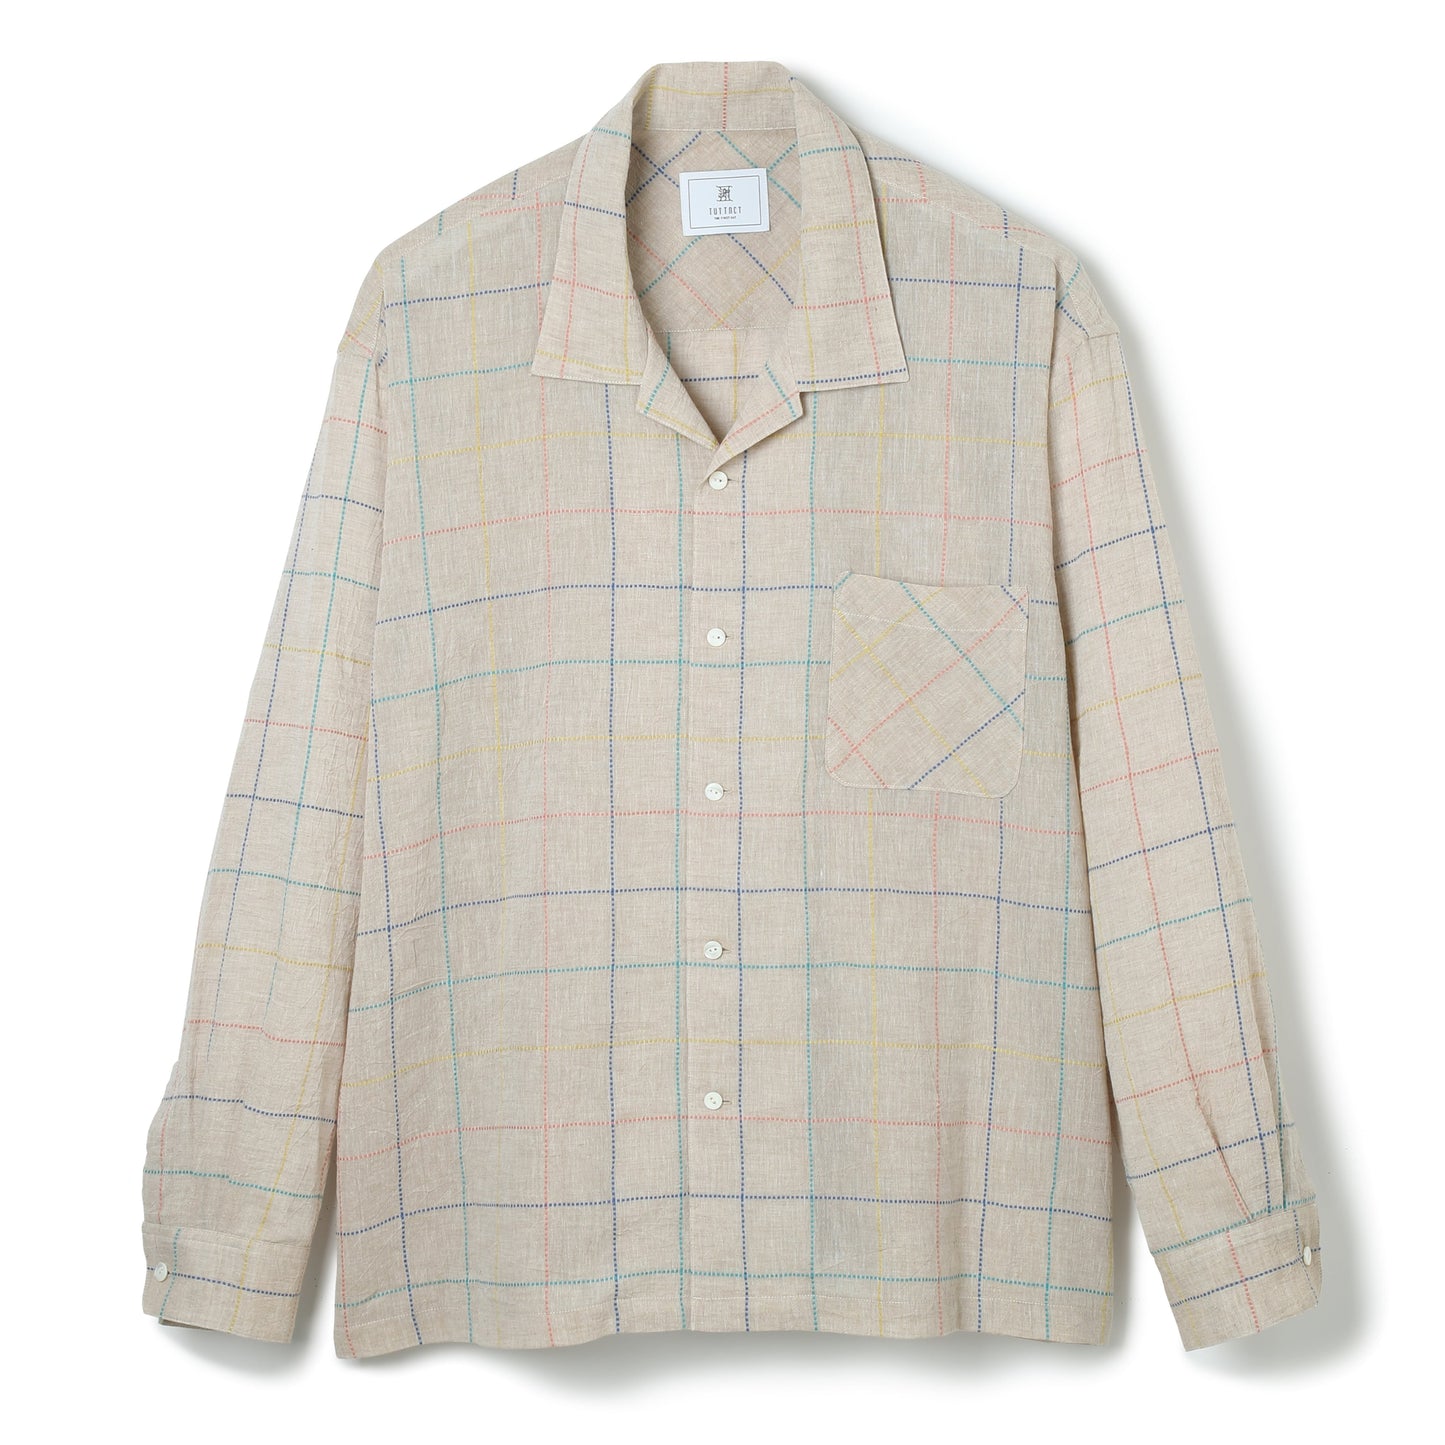 TUITACI QUILTED CLOTH L/S SHIRTS